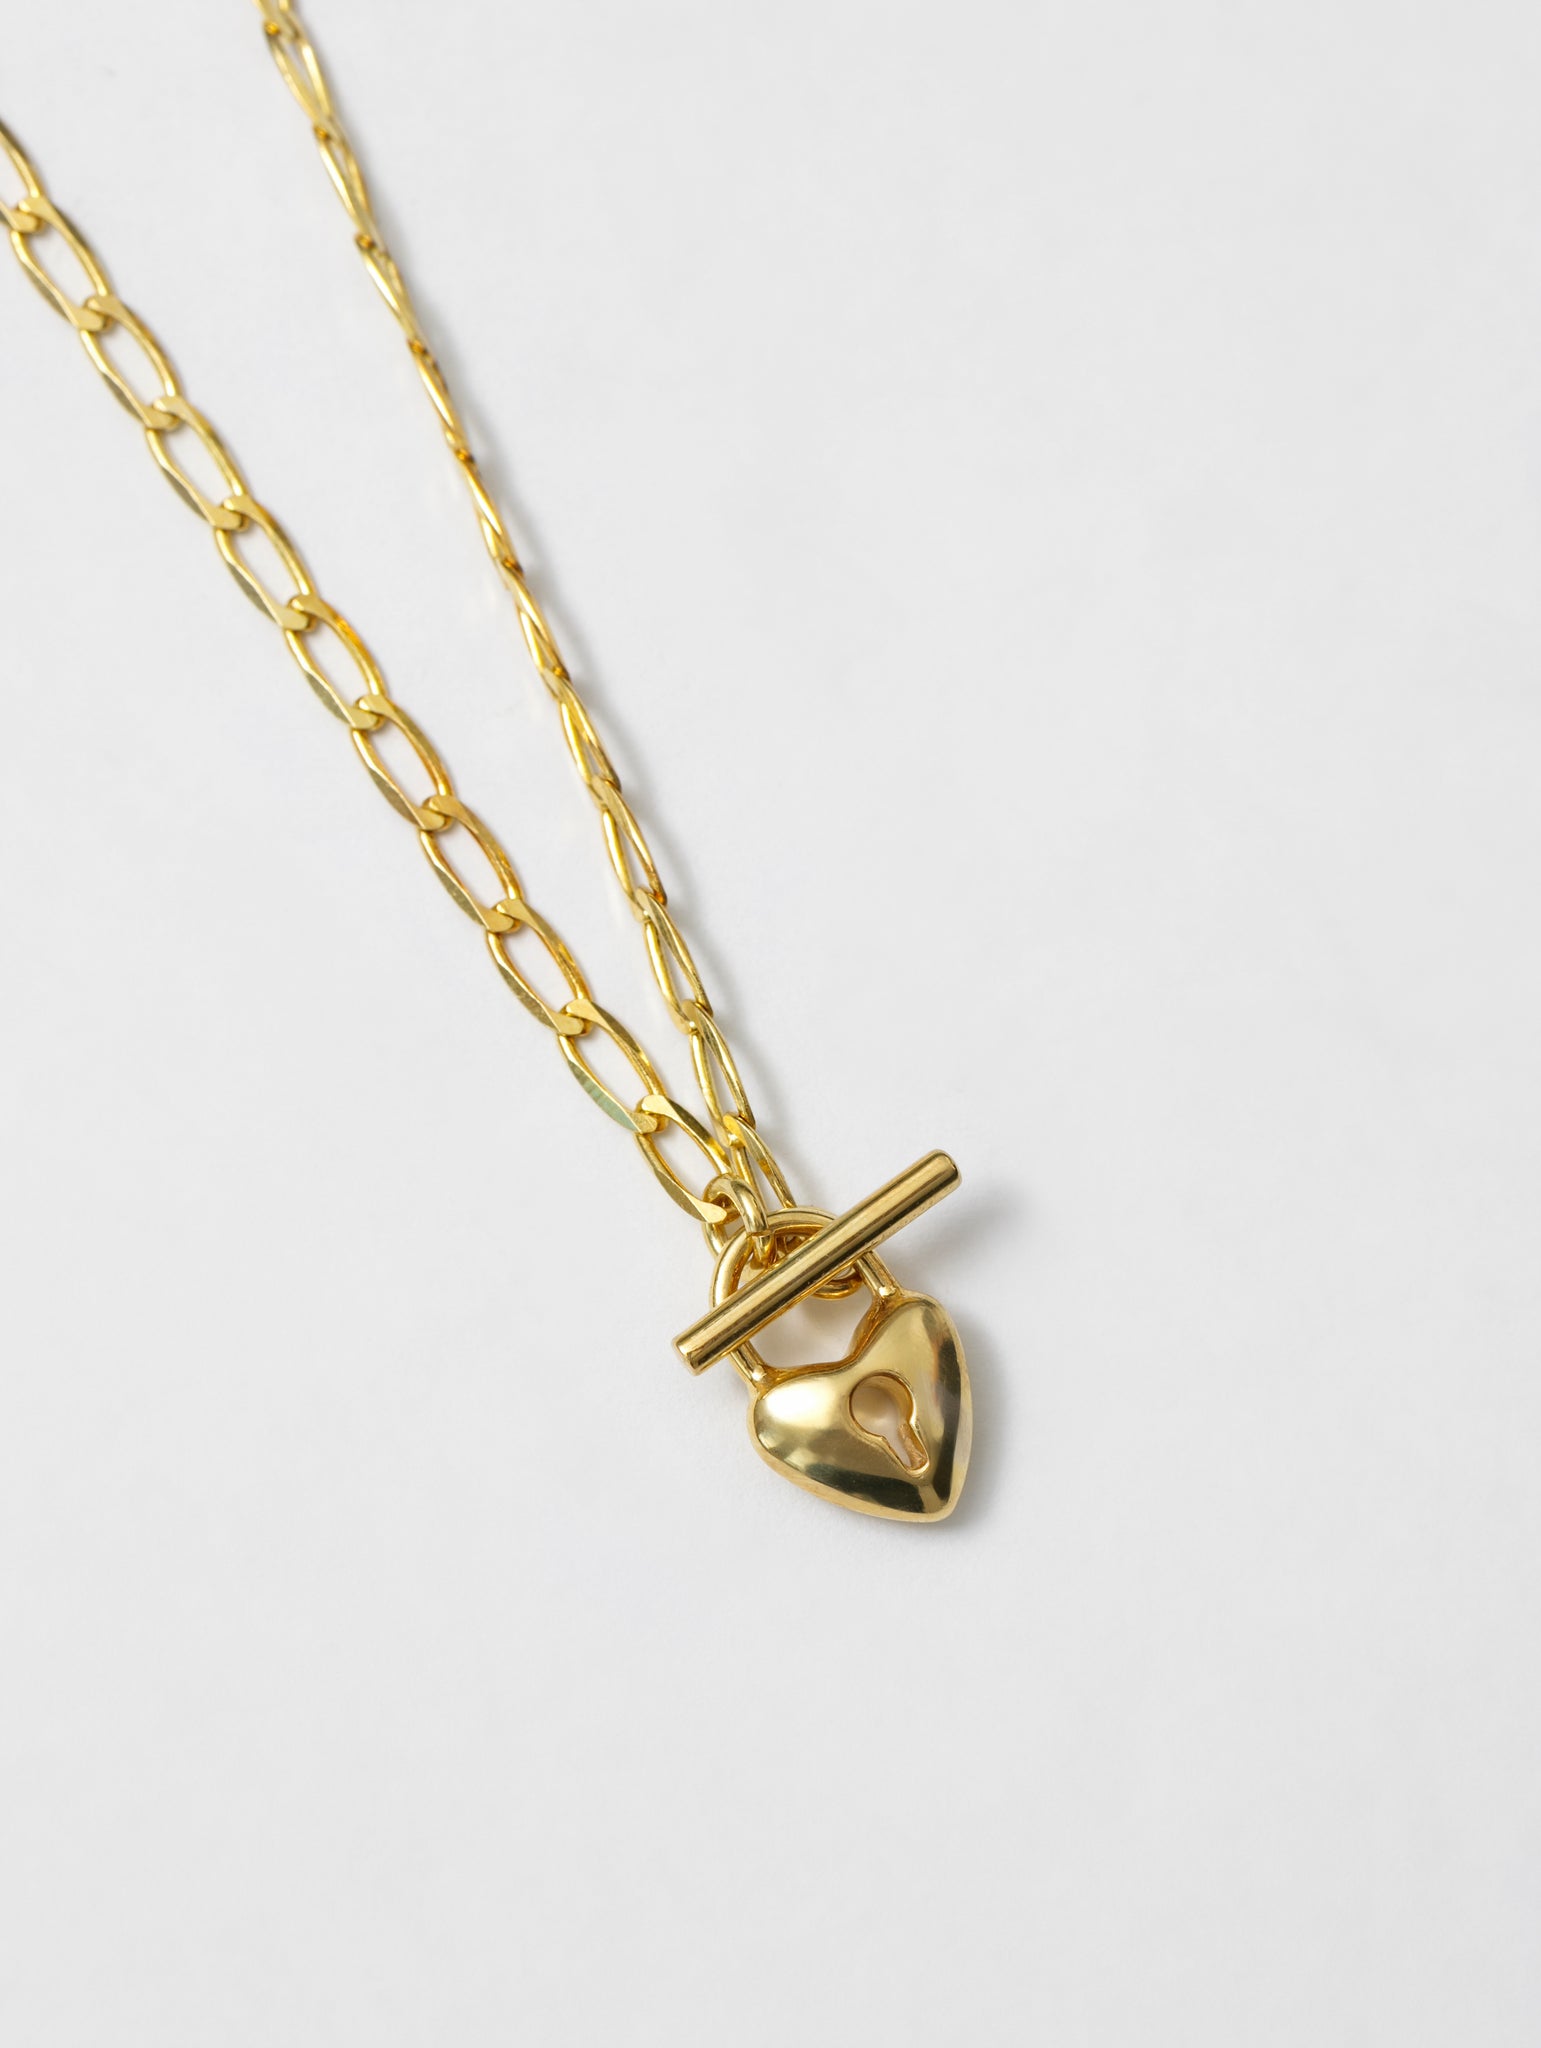 Wolf Circus Heart Locket Toggle Clasp Curb Chain Necklace in 14k Gold Plated